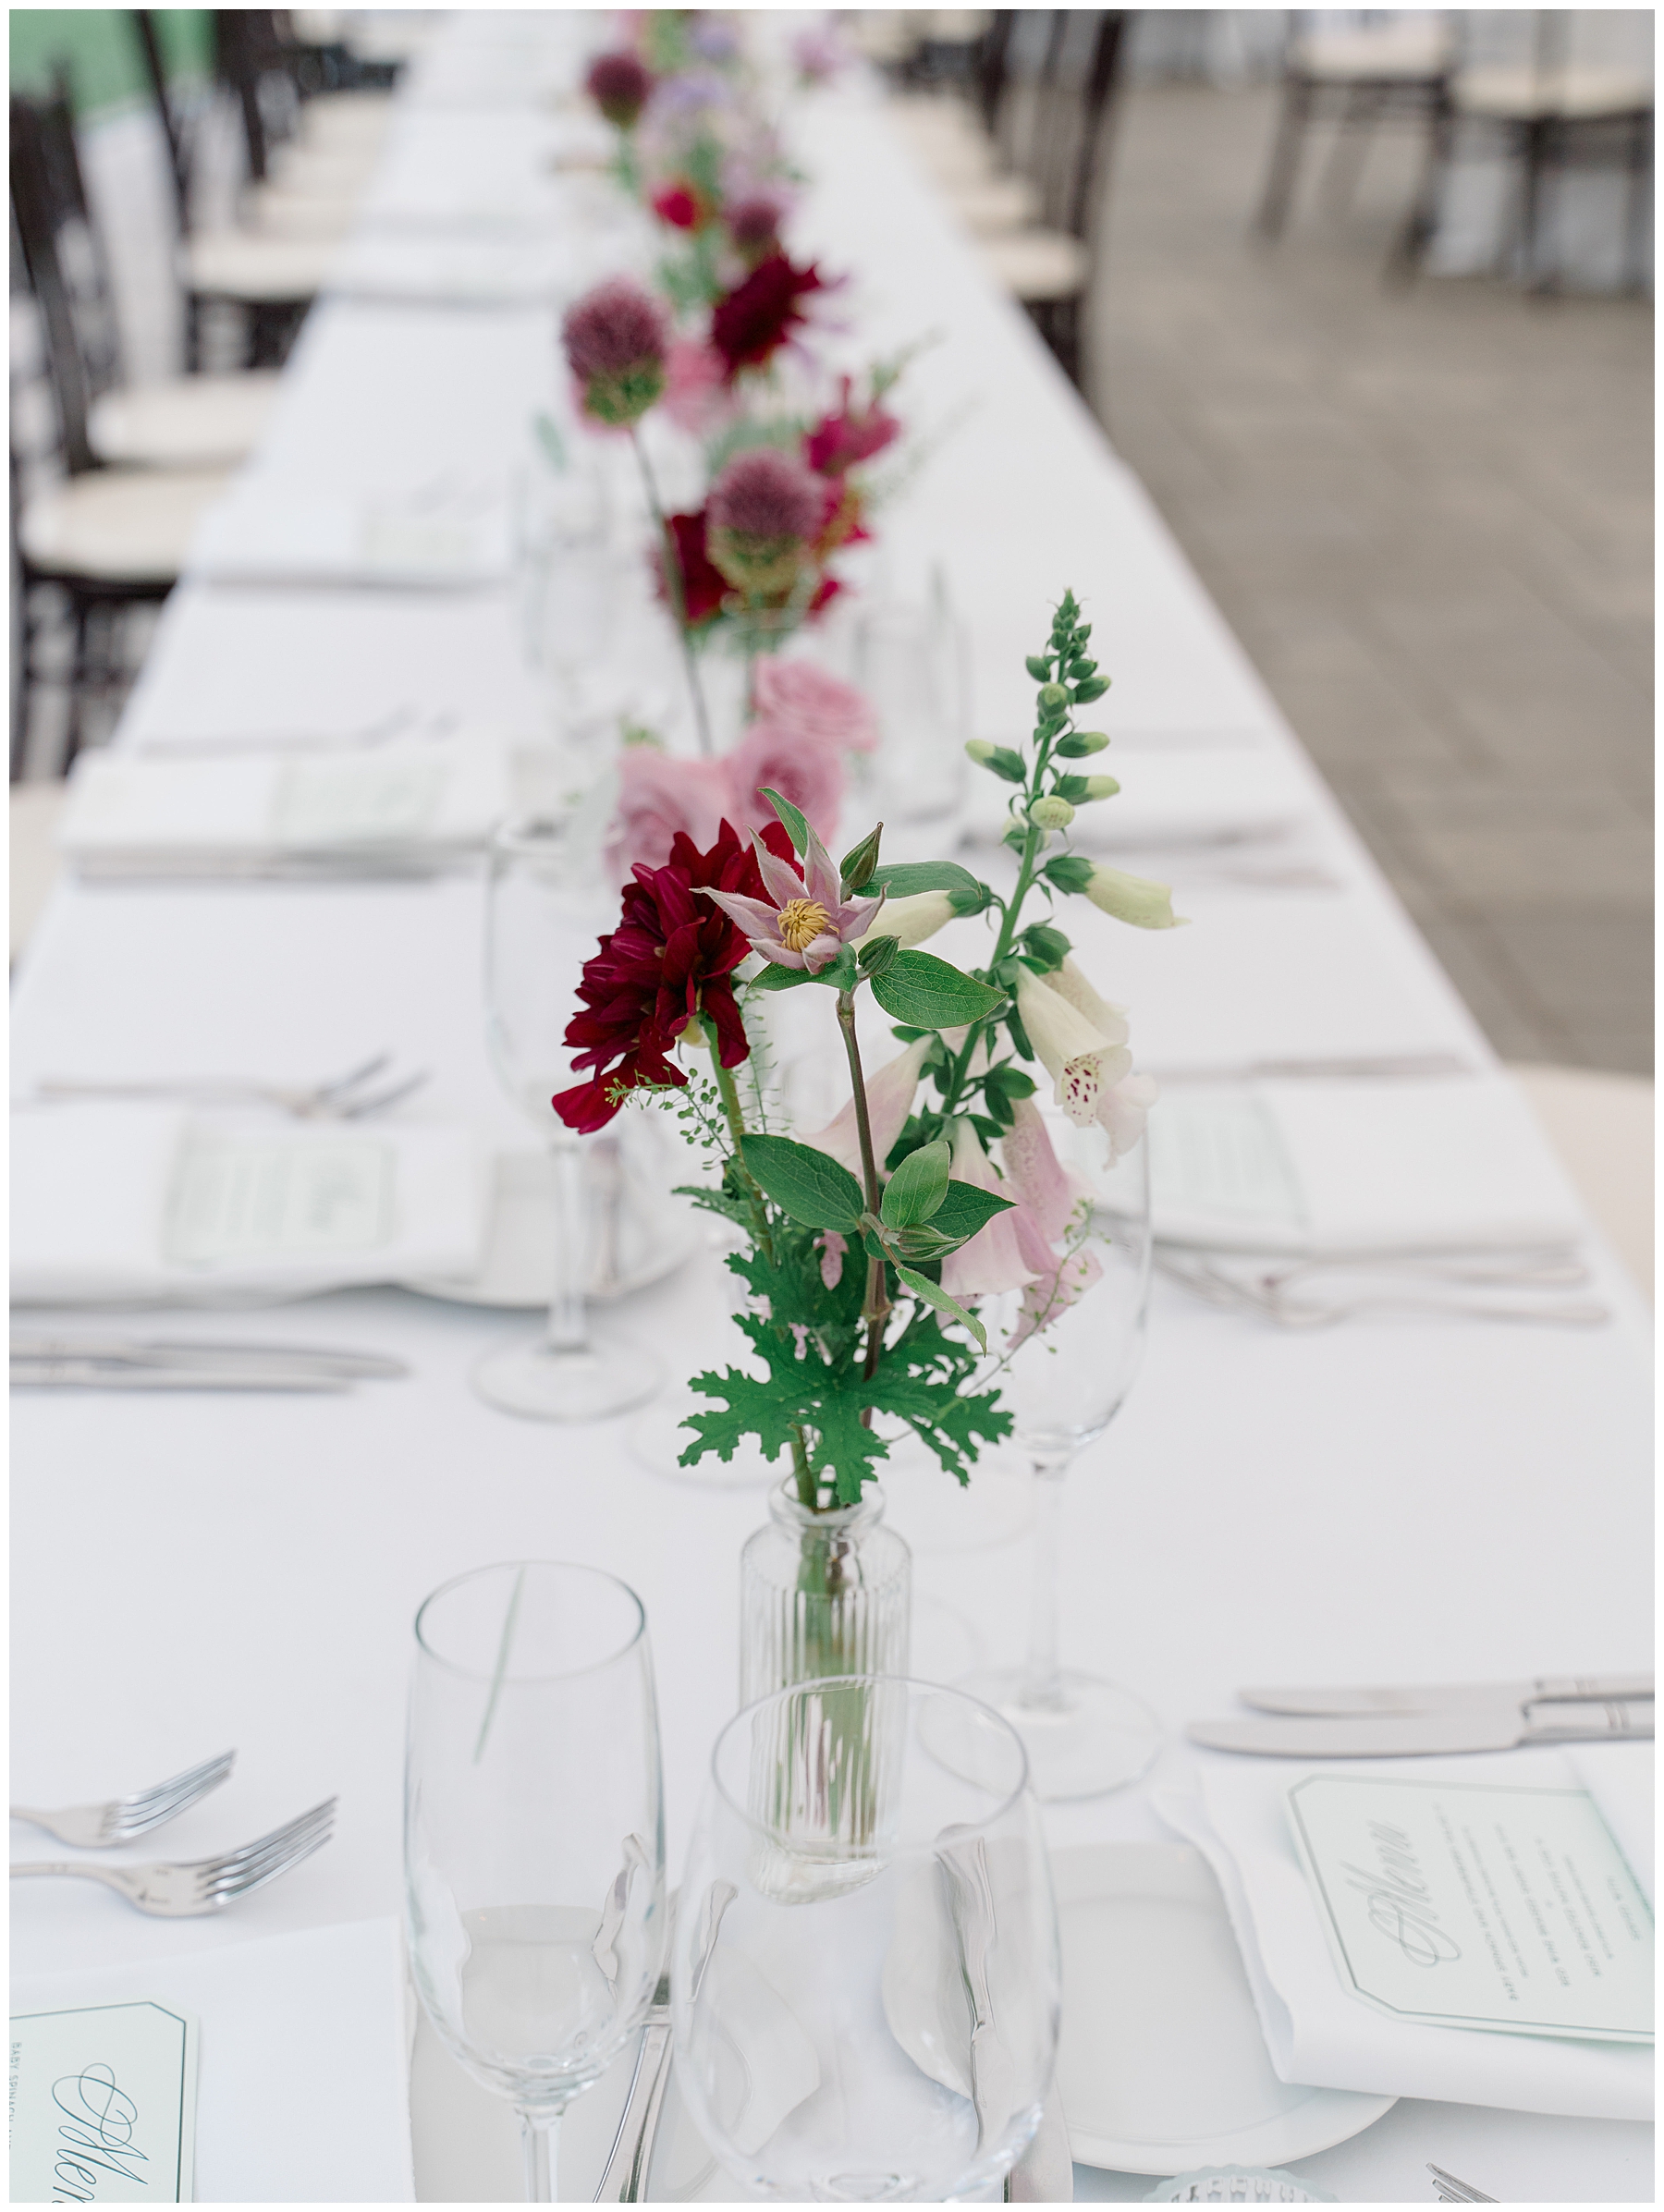 reception tables with pink and lavender flowers from Summer Bradley Estate Wedding